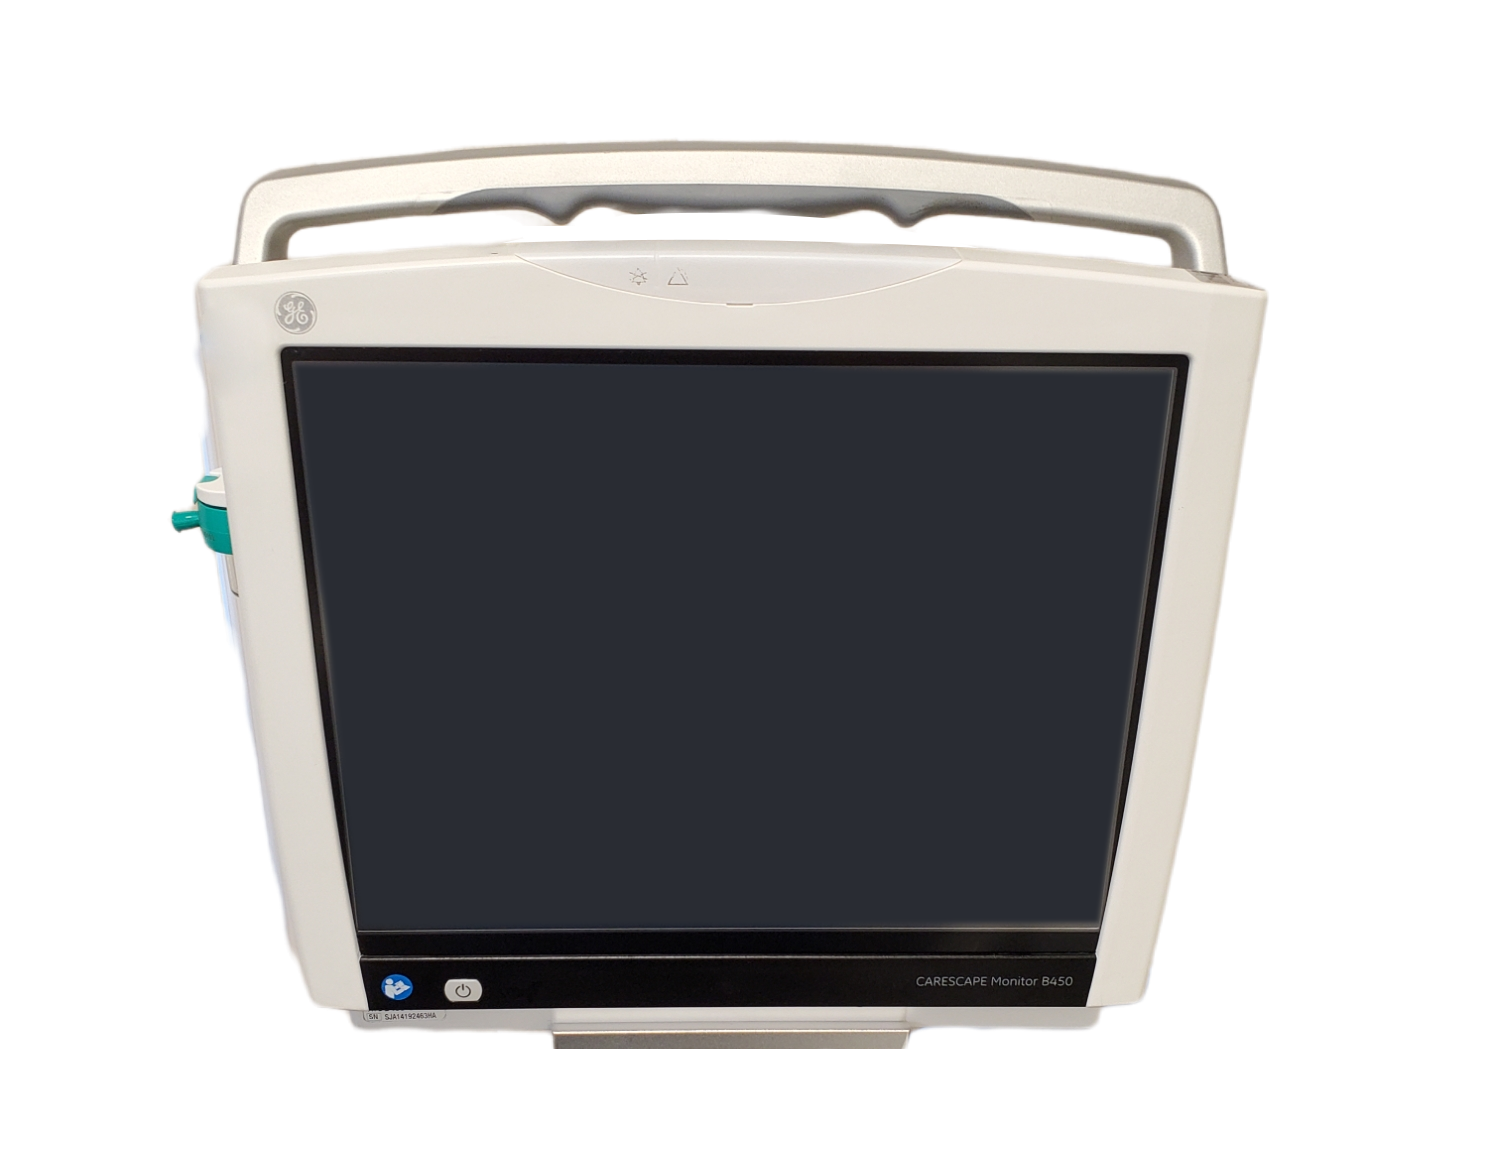 GE B450 Patient Monitor